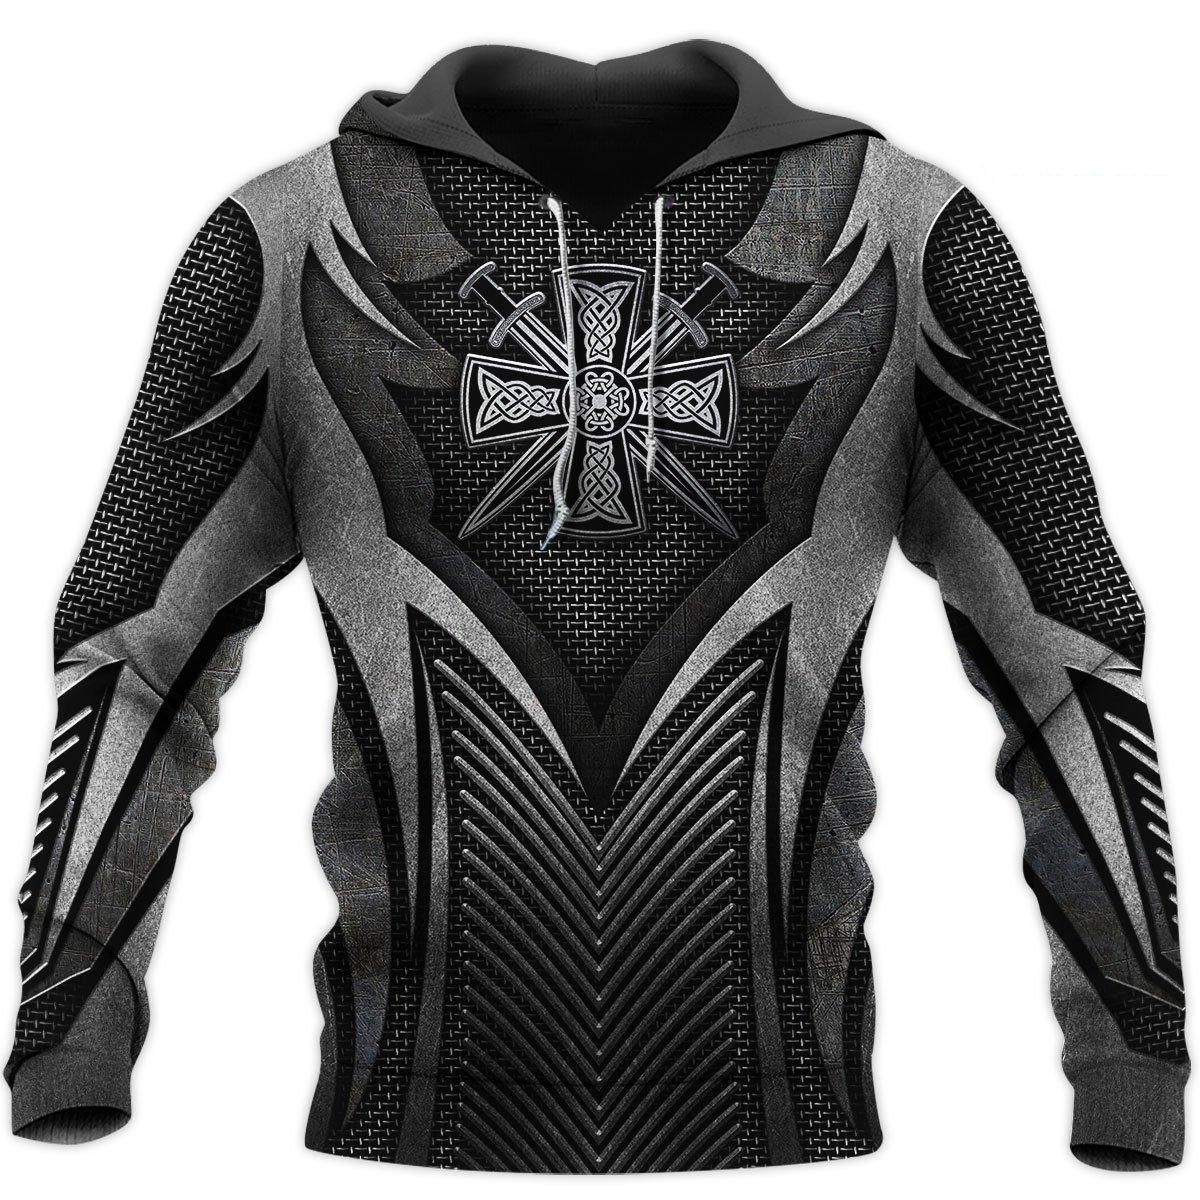 Irish Armor Warrior Chainmail 3D All Over Printed Shirts For Men And Women Tt280204